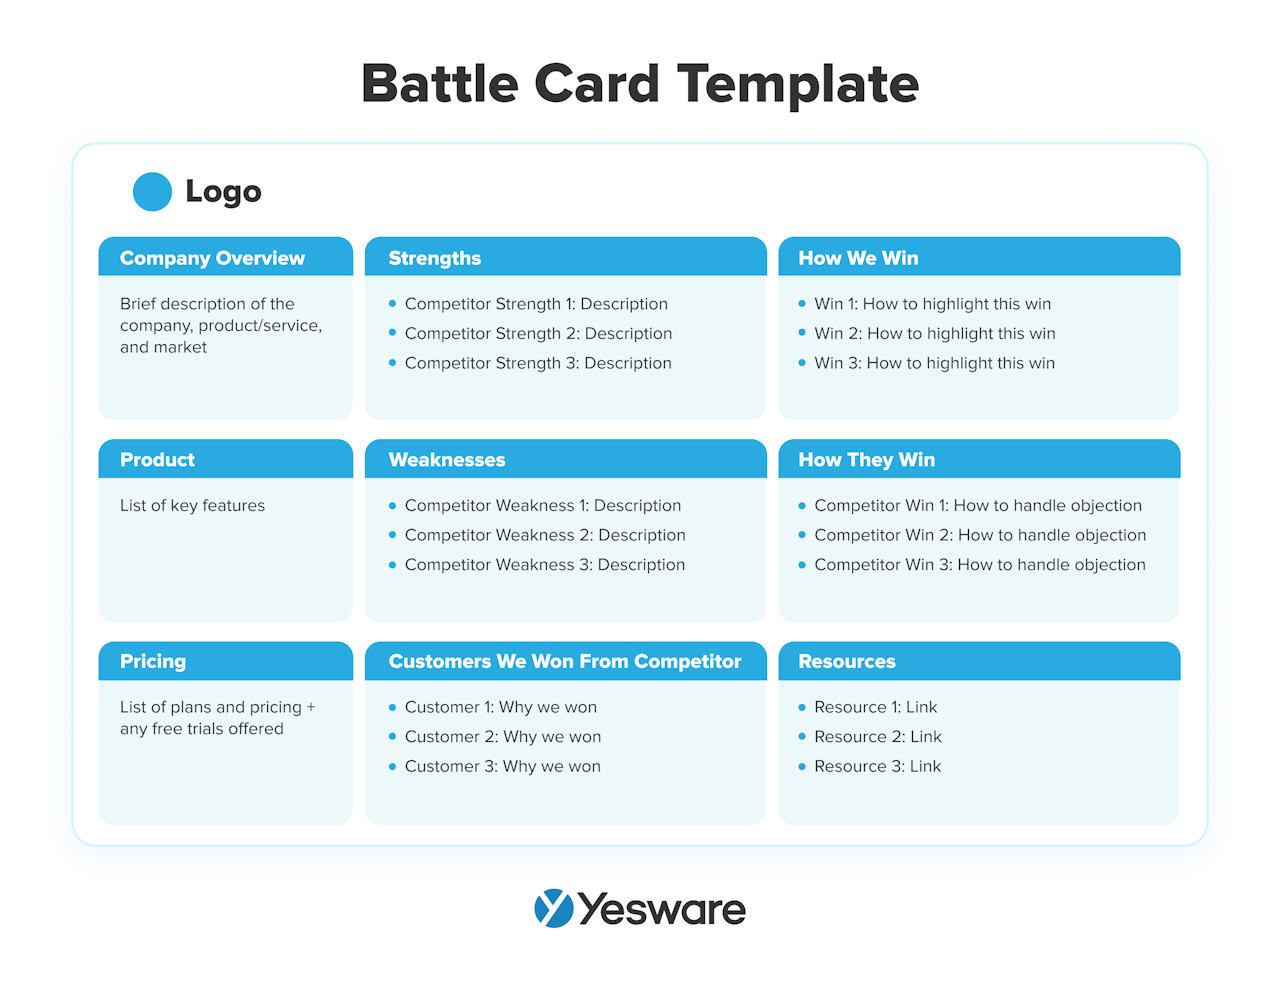 Strategic Sales Plans Examples: Battle Card Template